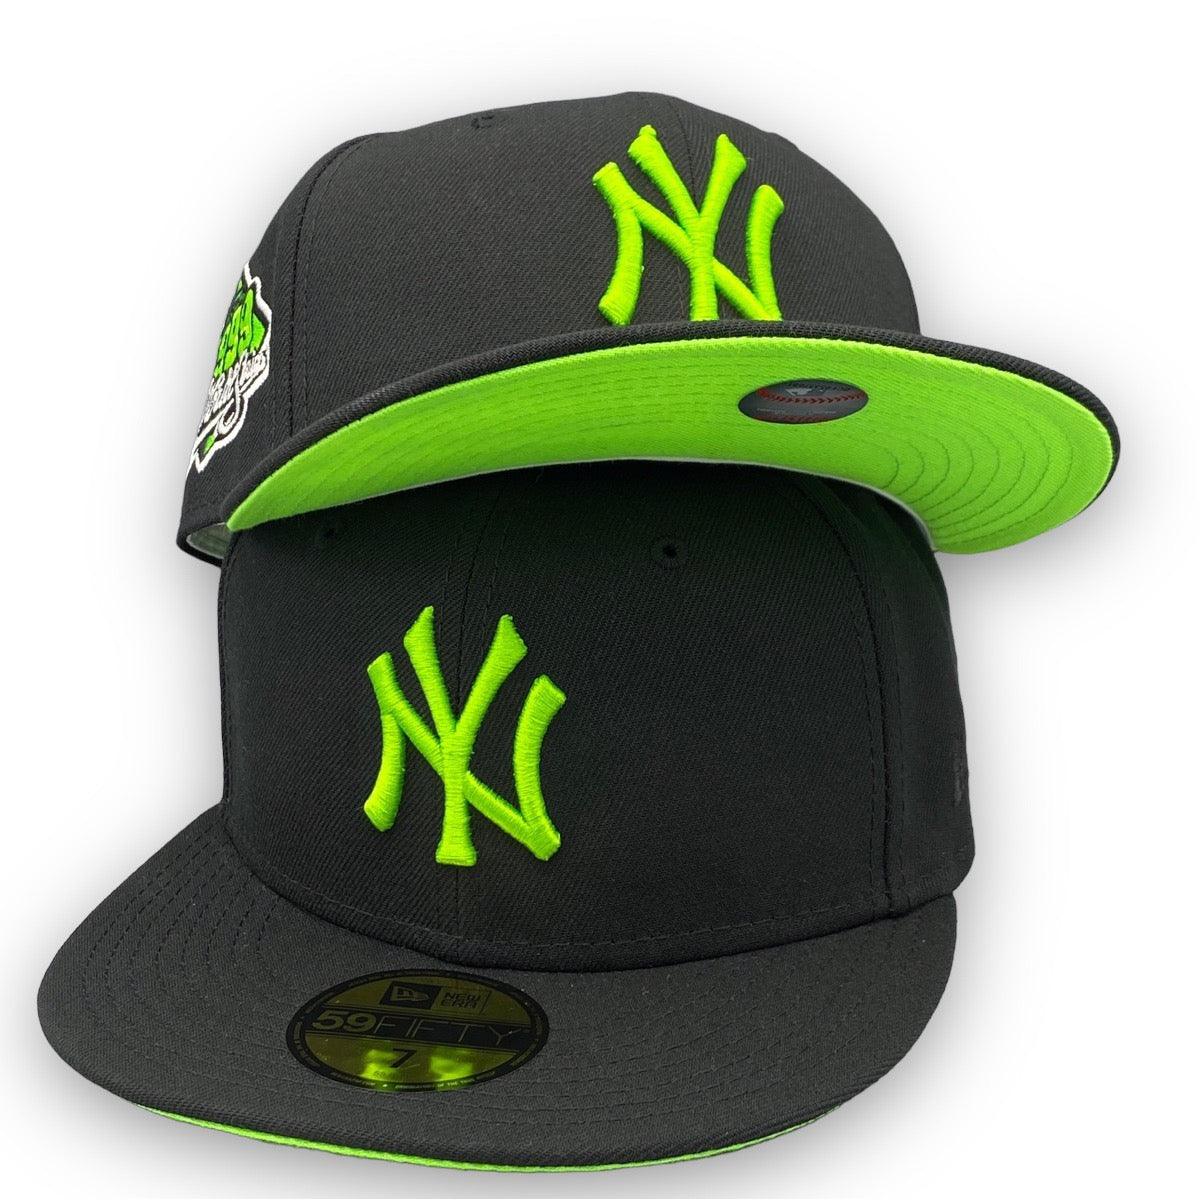 fitted hats green